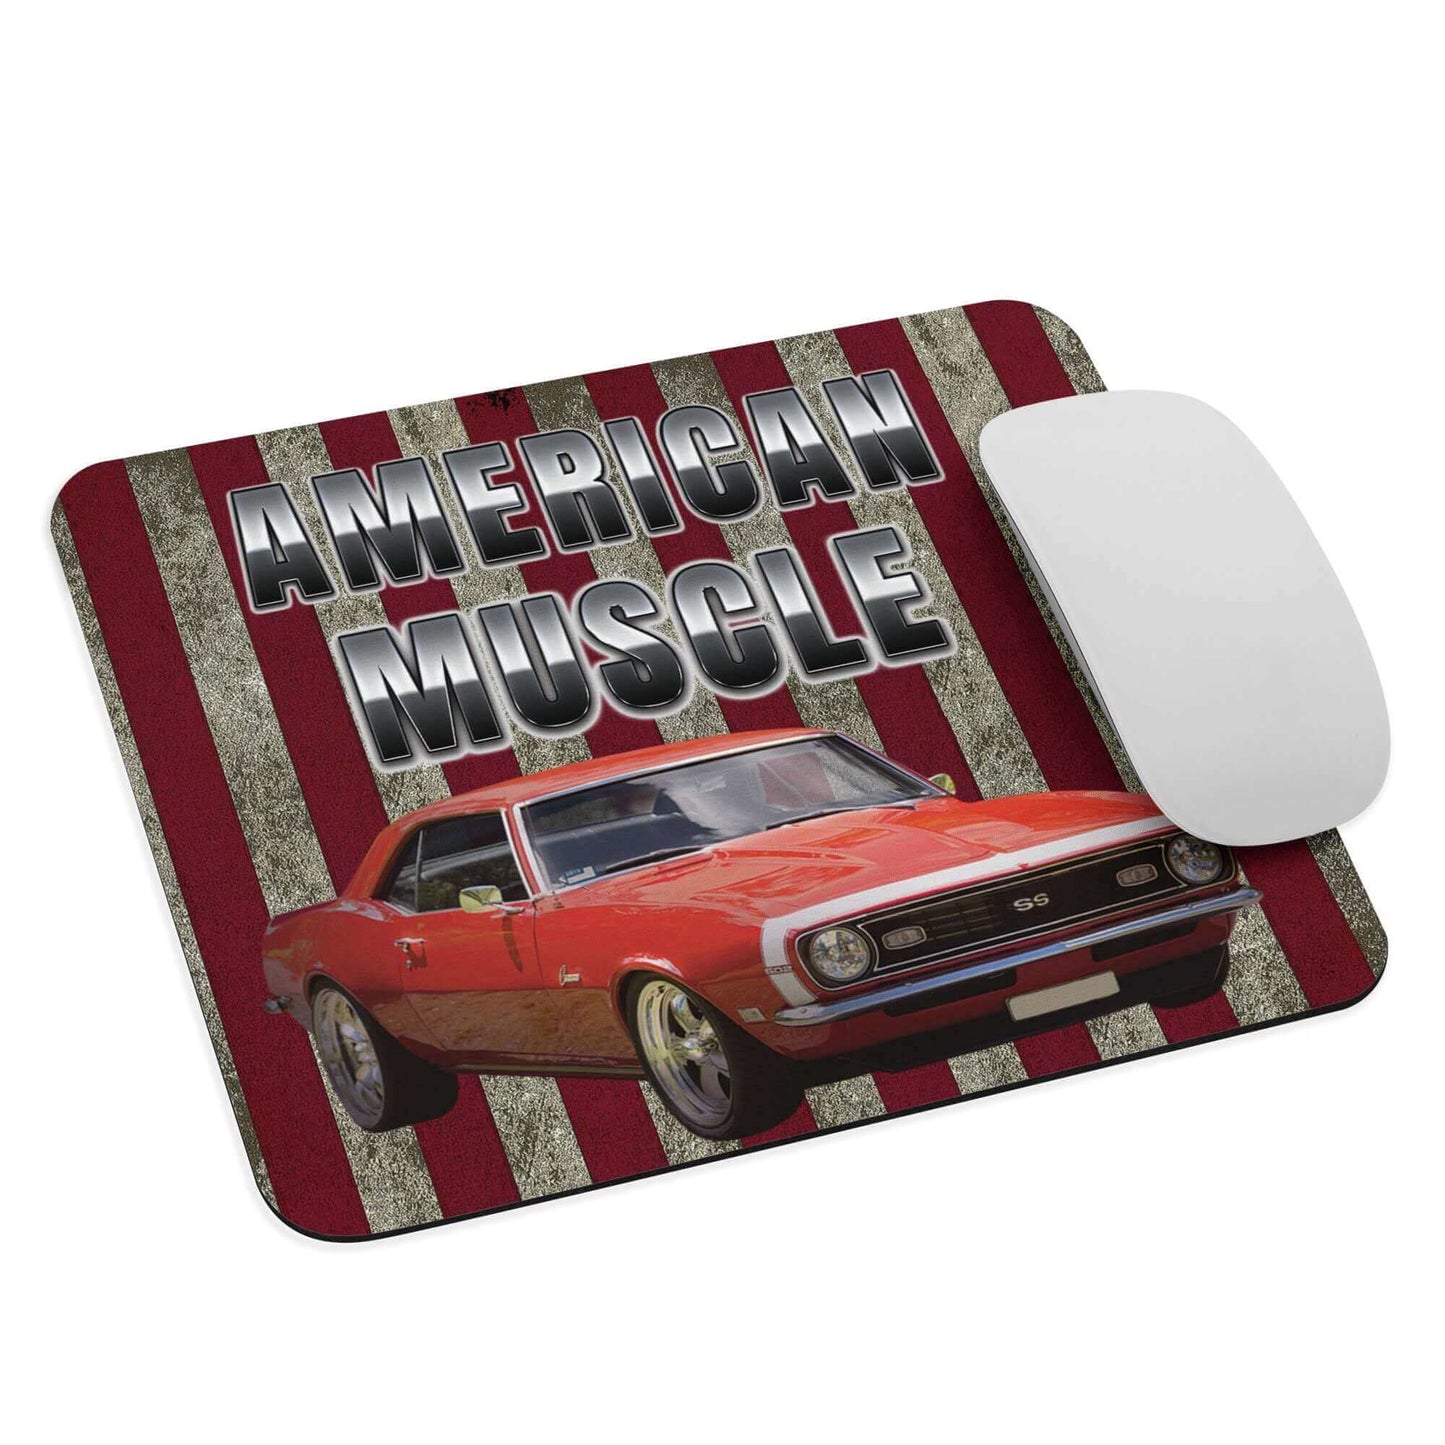 American Muscle - Chevy Corvette - Mouse pad american made Chevy Chrevrolet Corvette Custom Mouse Pad gas car gasoline car made in America muscle car V6 V8